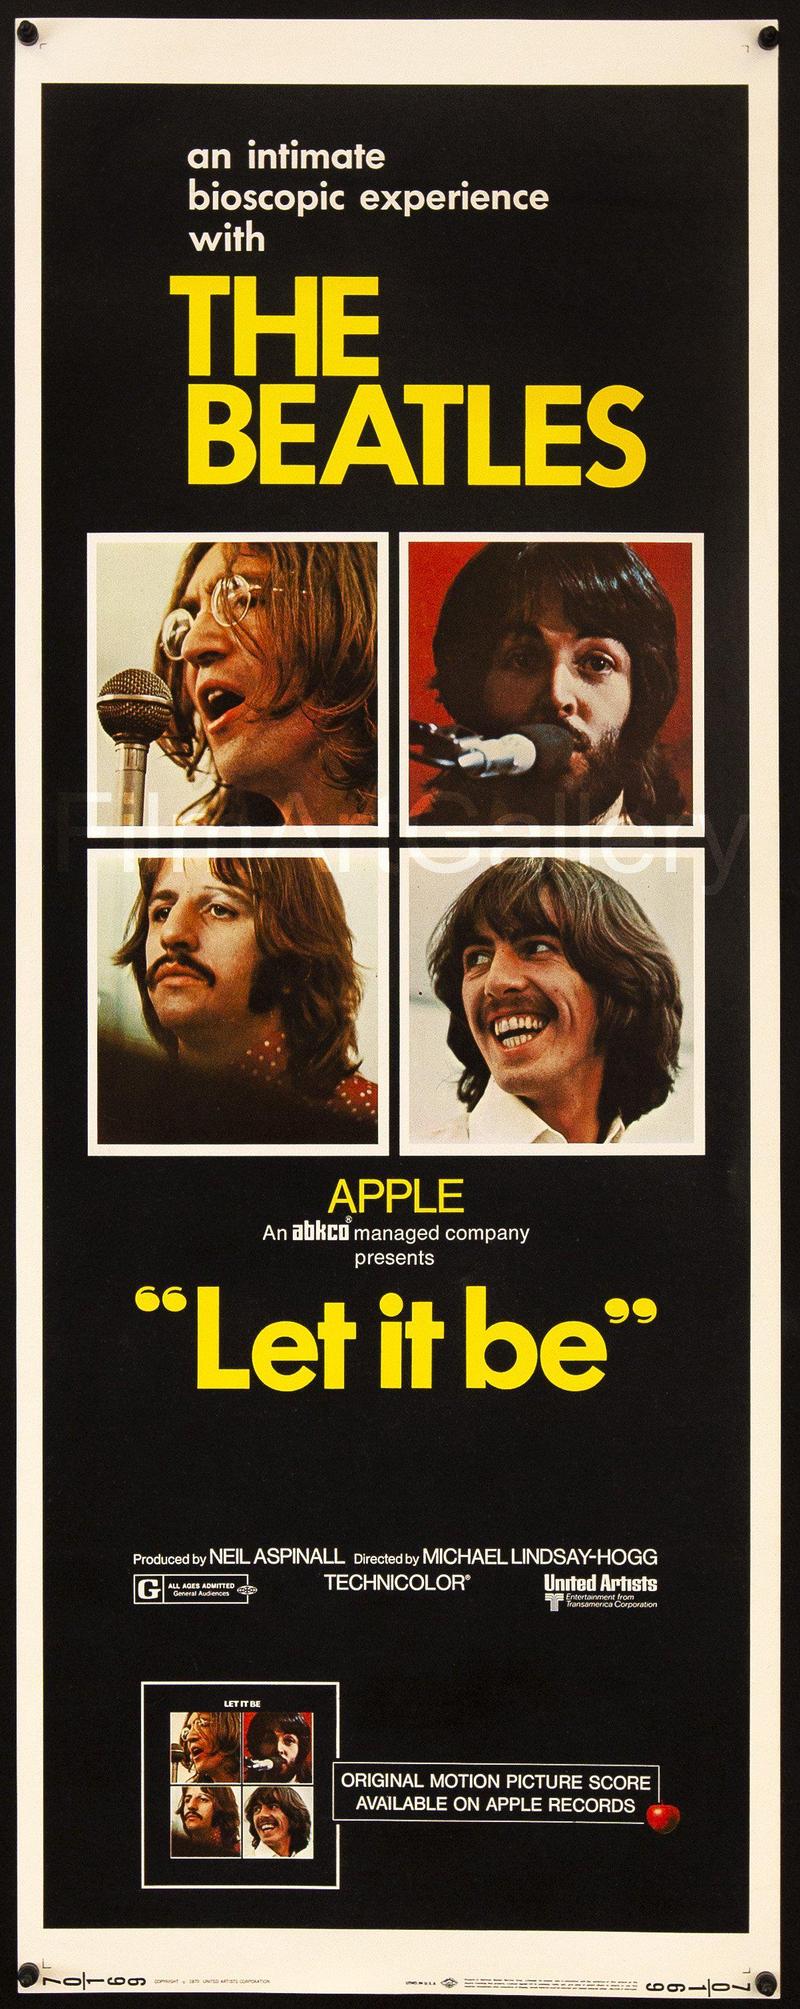 The Beatles On The Roof: Let it be